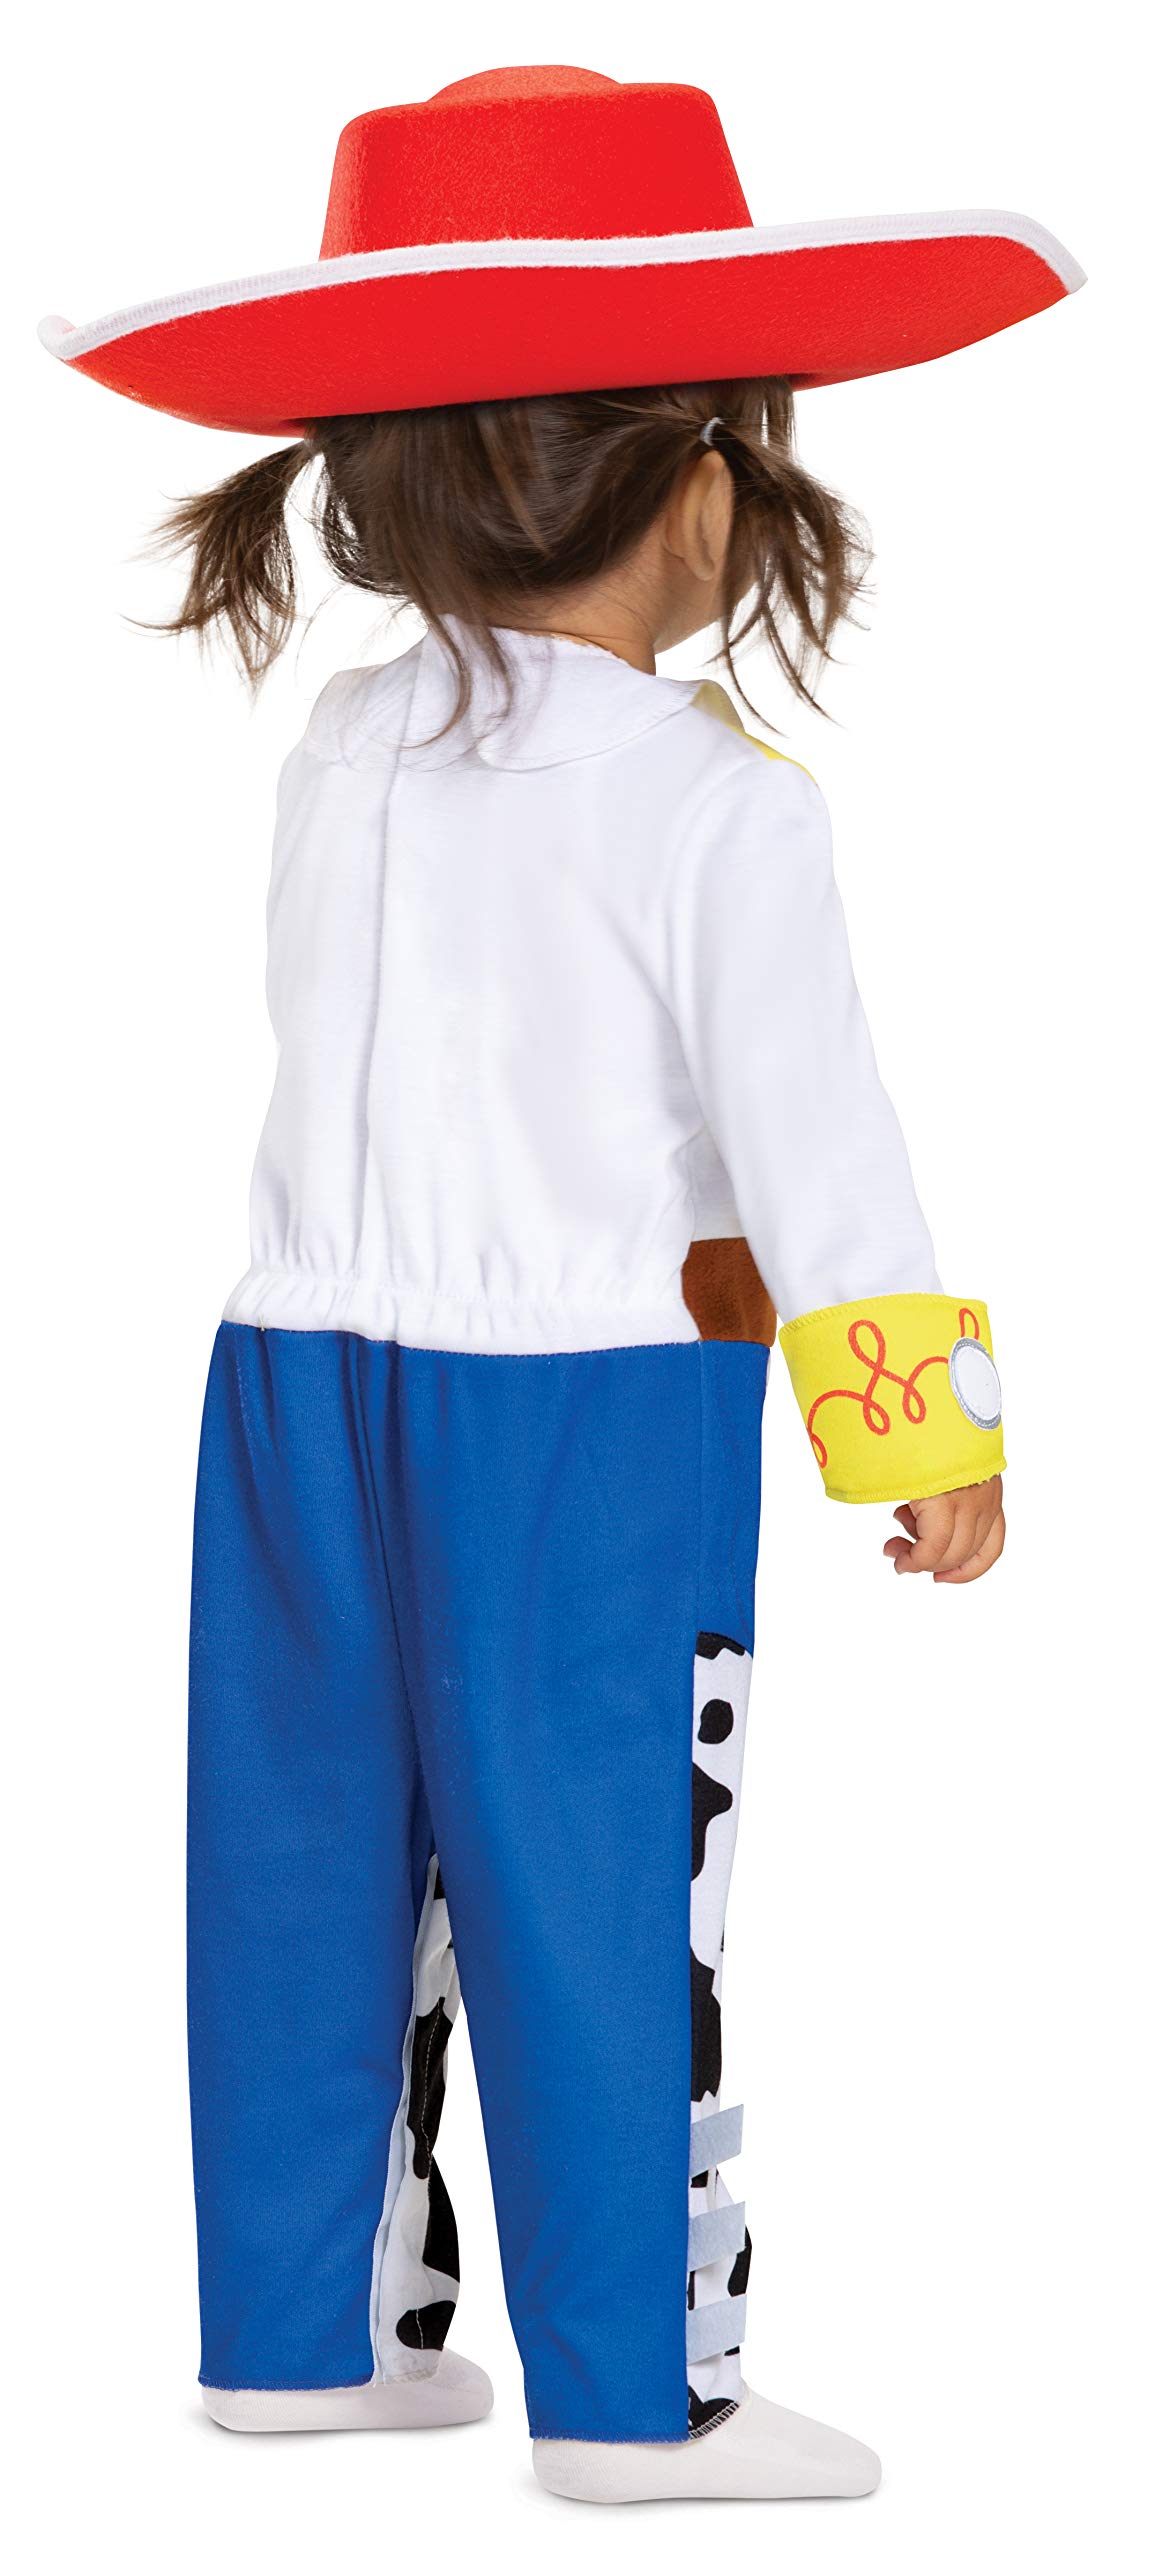 Disguise Deluxe Infant Jessie Costume